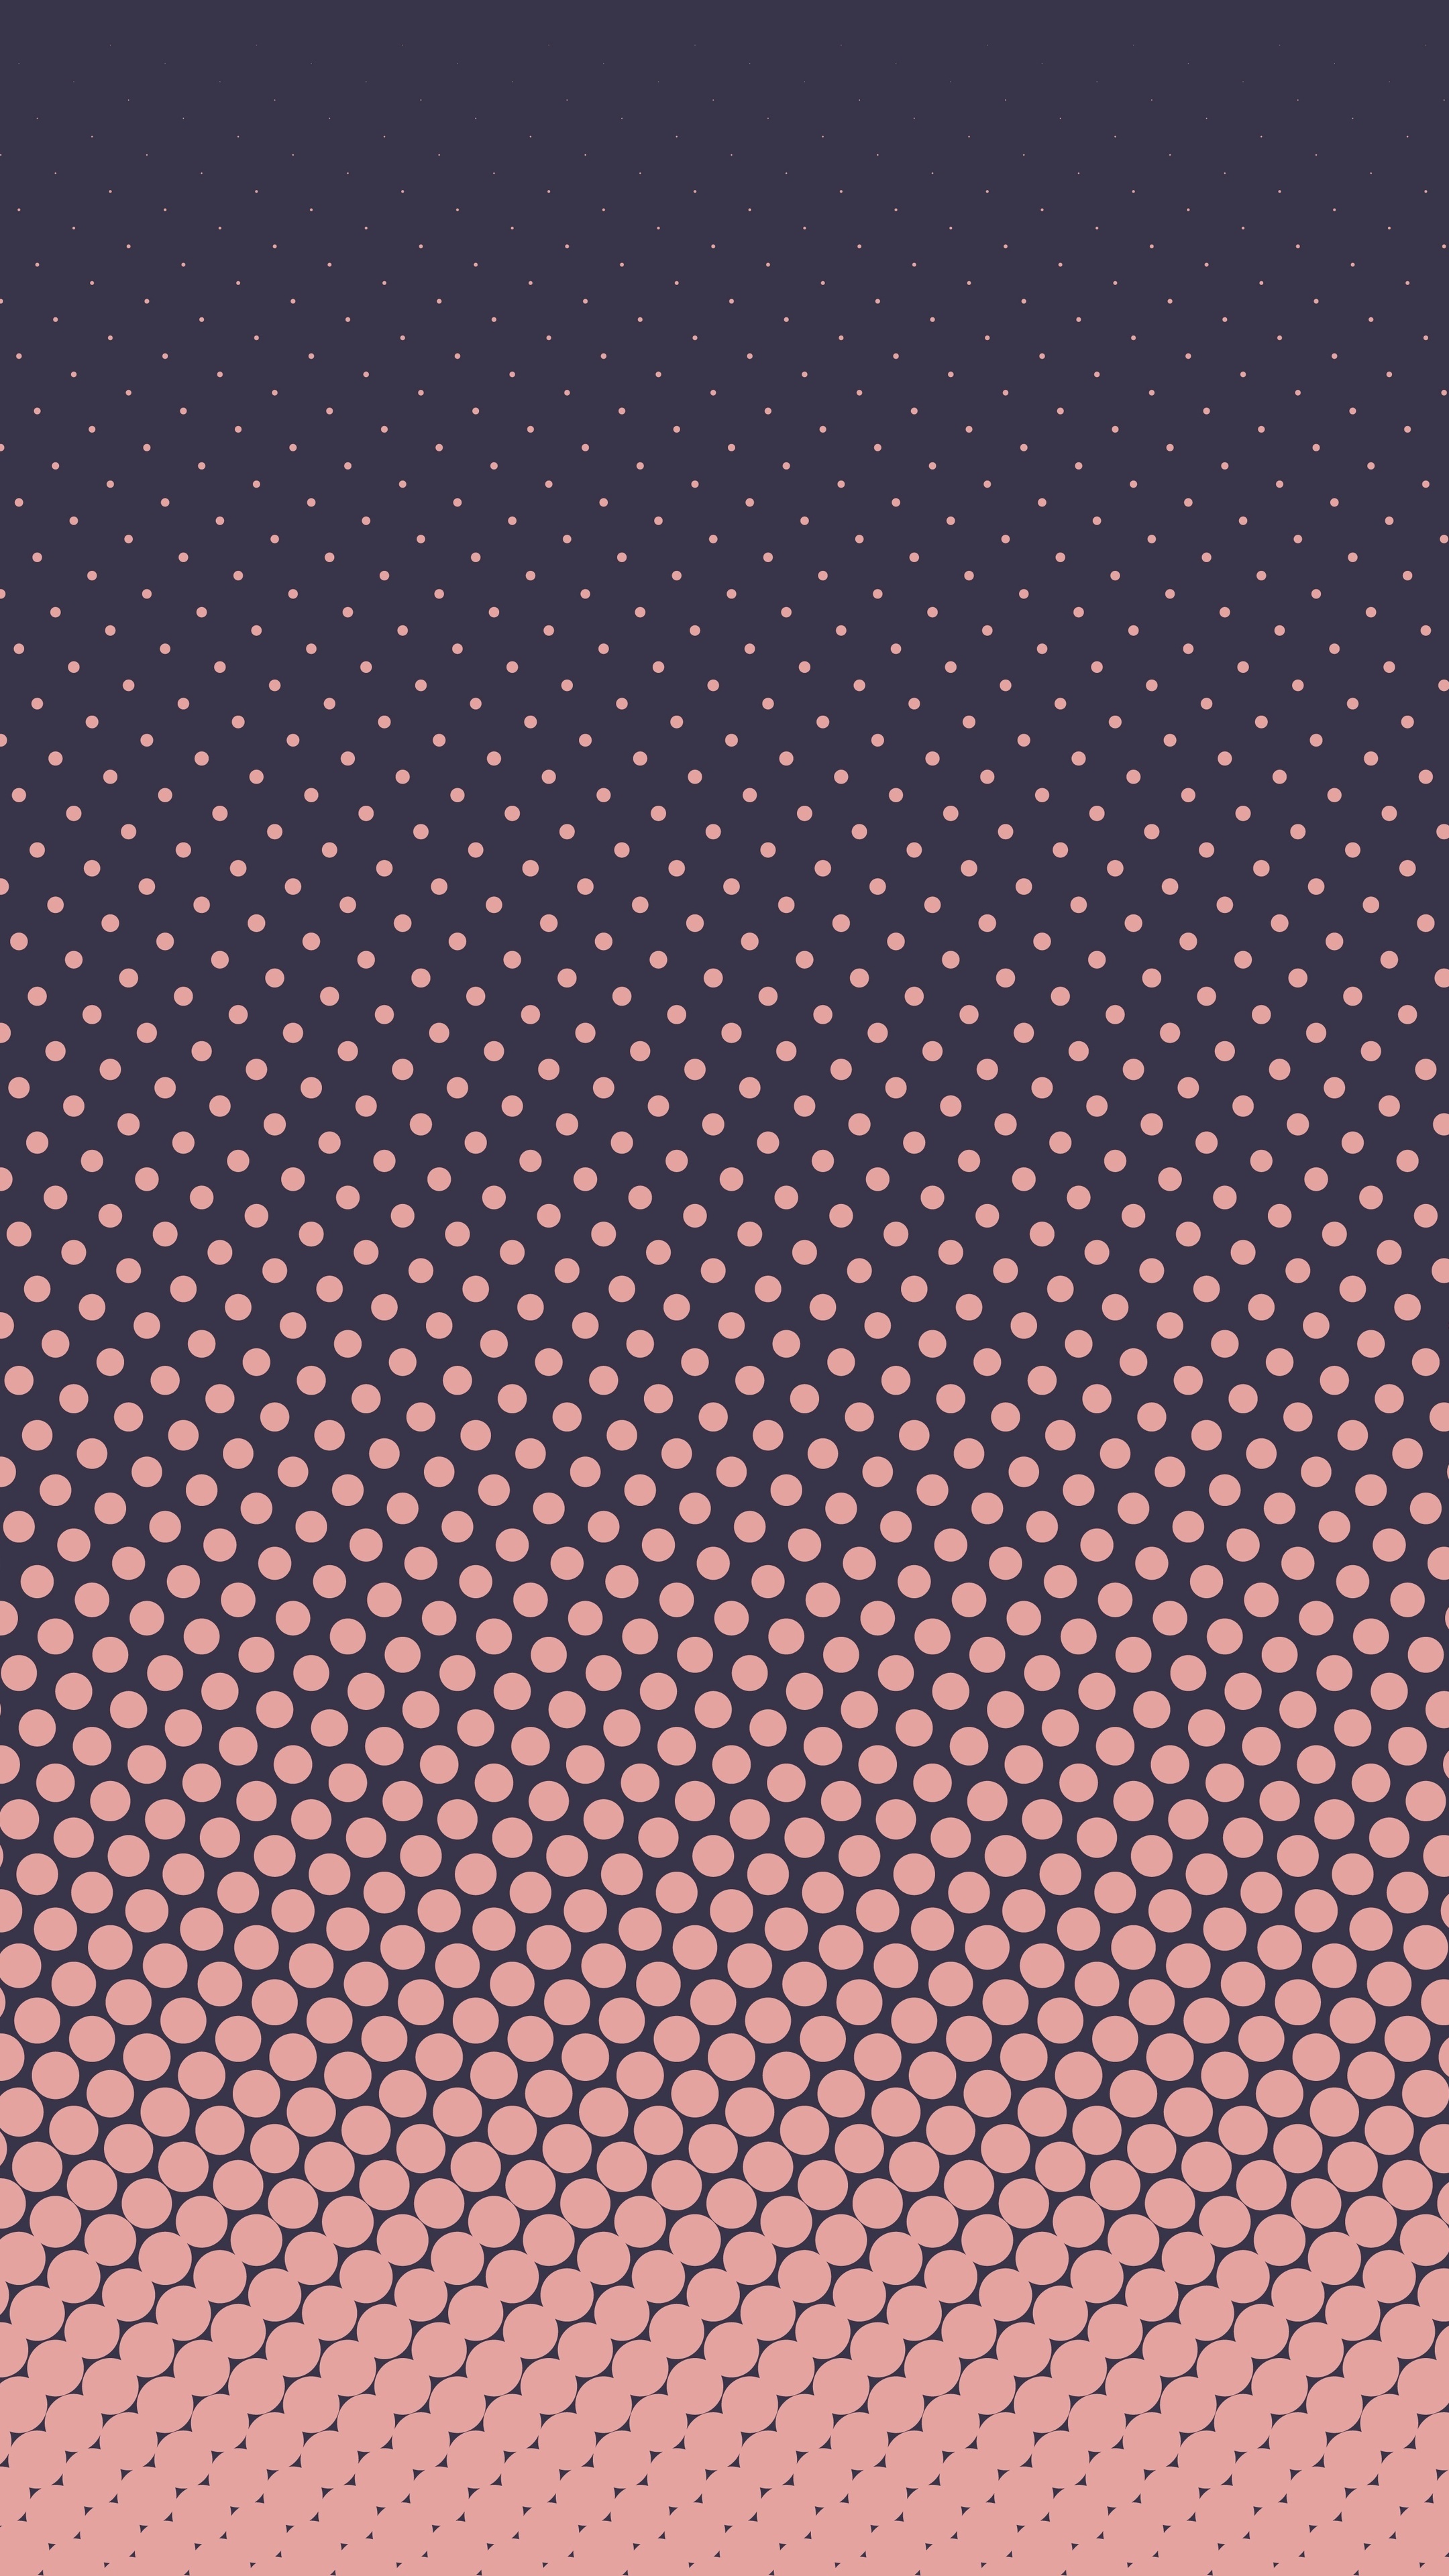 Abstract dots texture, Simple background, Sony Xperia wallpaper, High resolution, 2160x3840 4K Handy